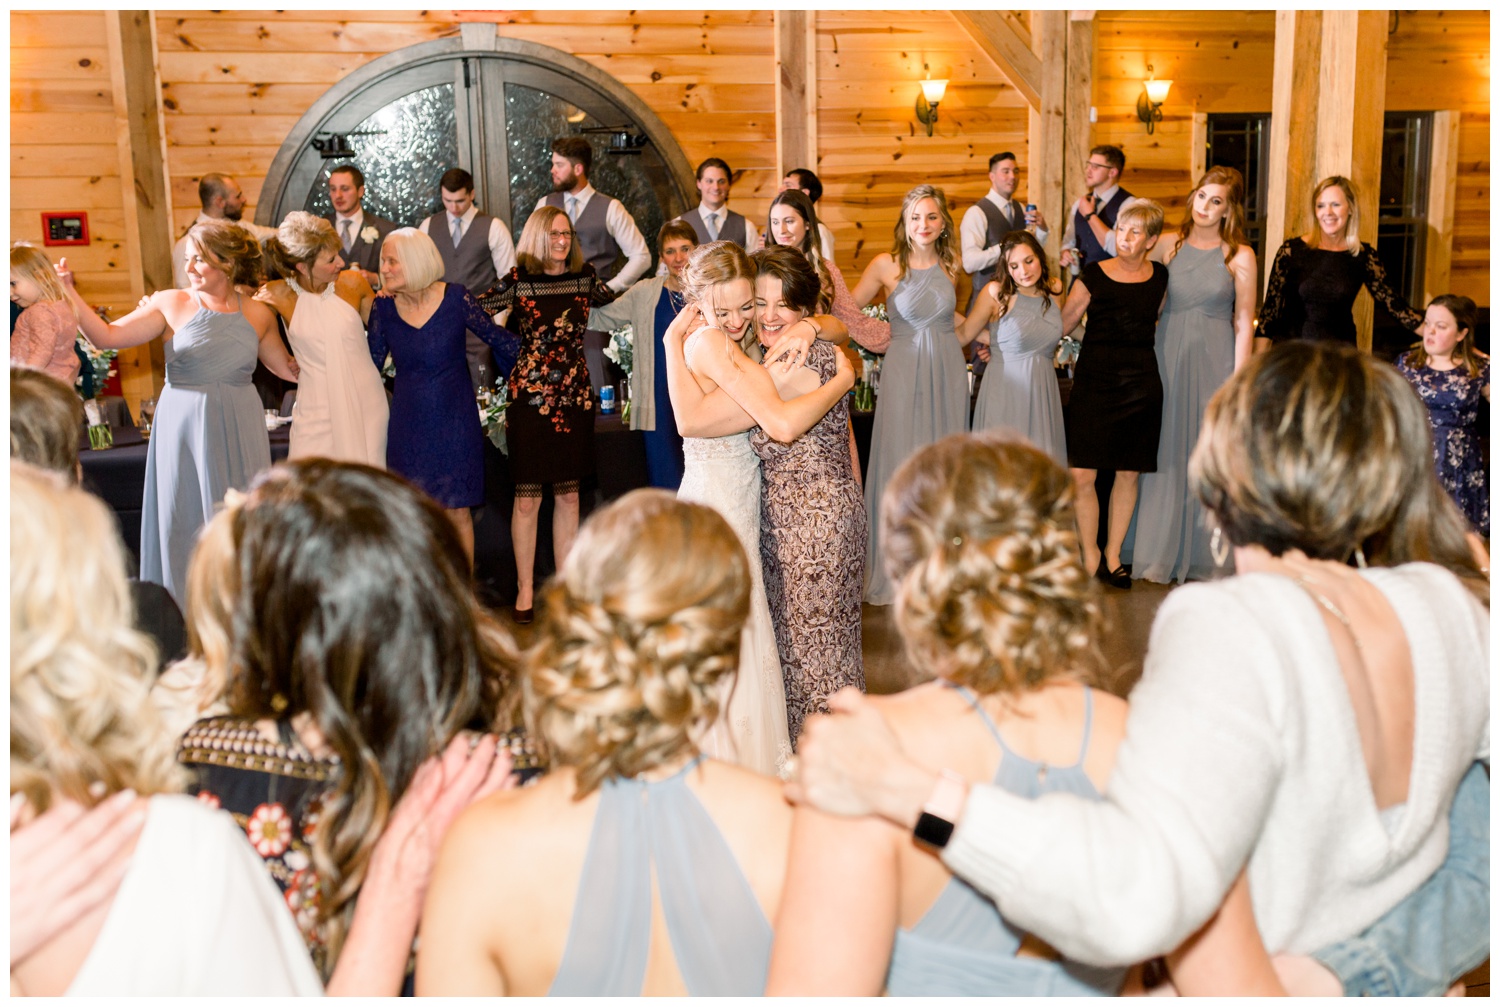 Mother Daughter Dance - Wedding Reception at Rolling Meadows Ranch